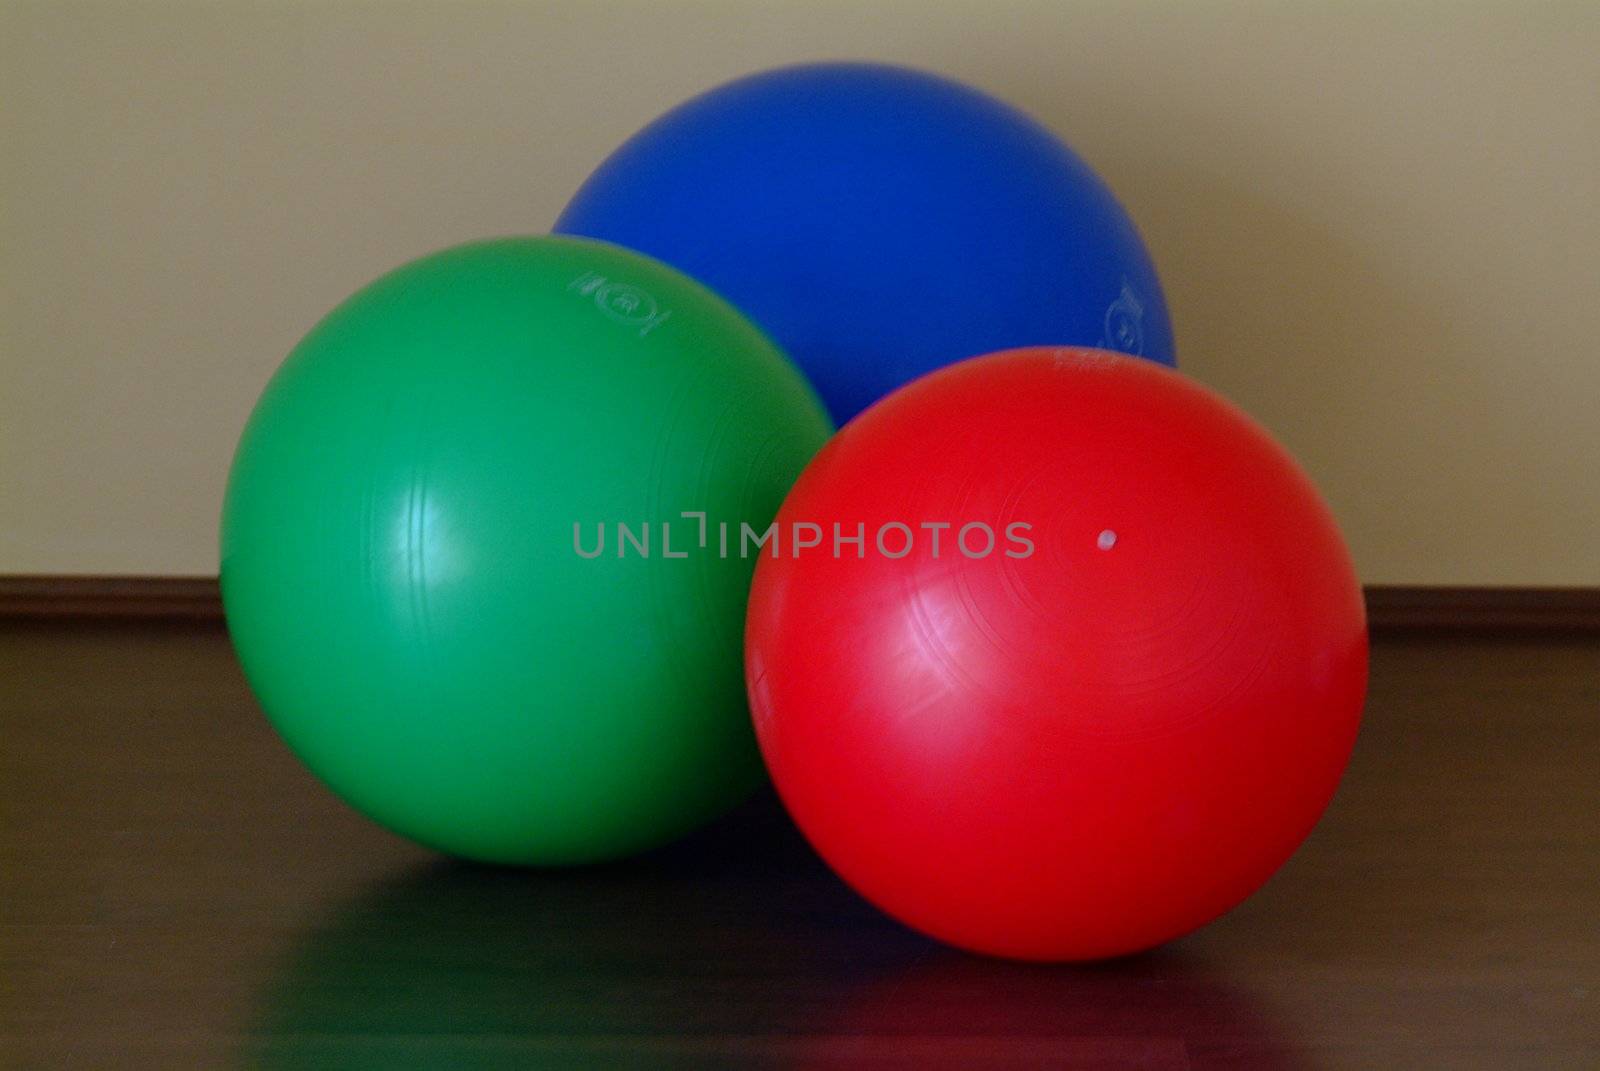 gym balls in blue, red and green on the floor